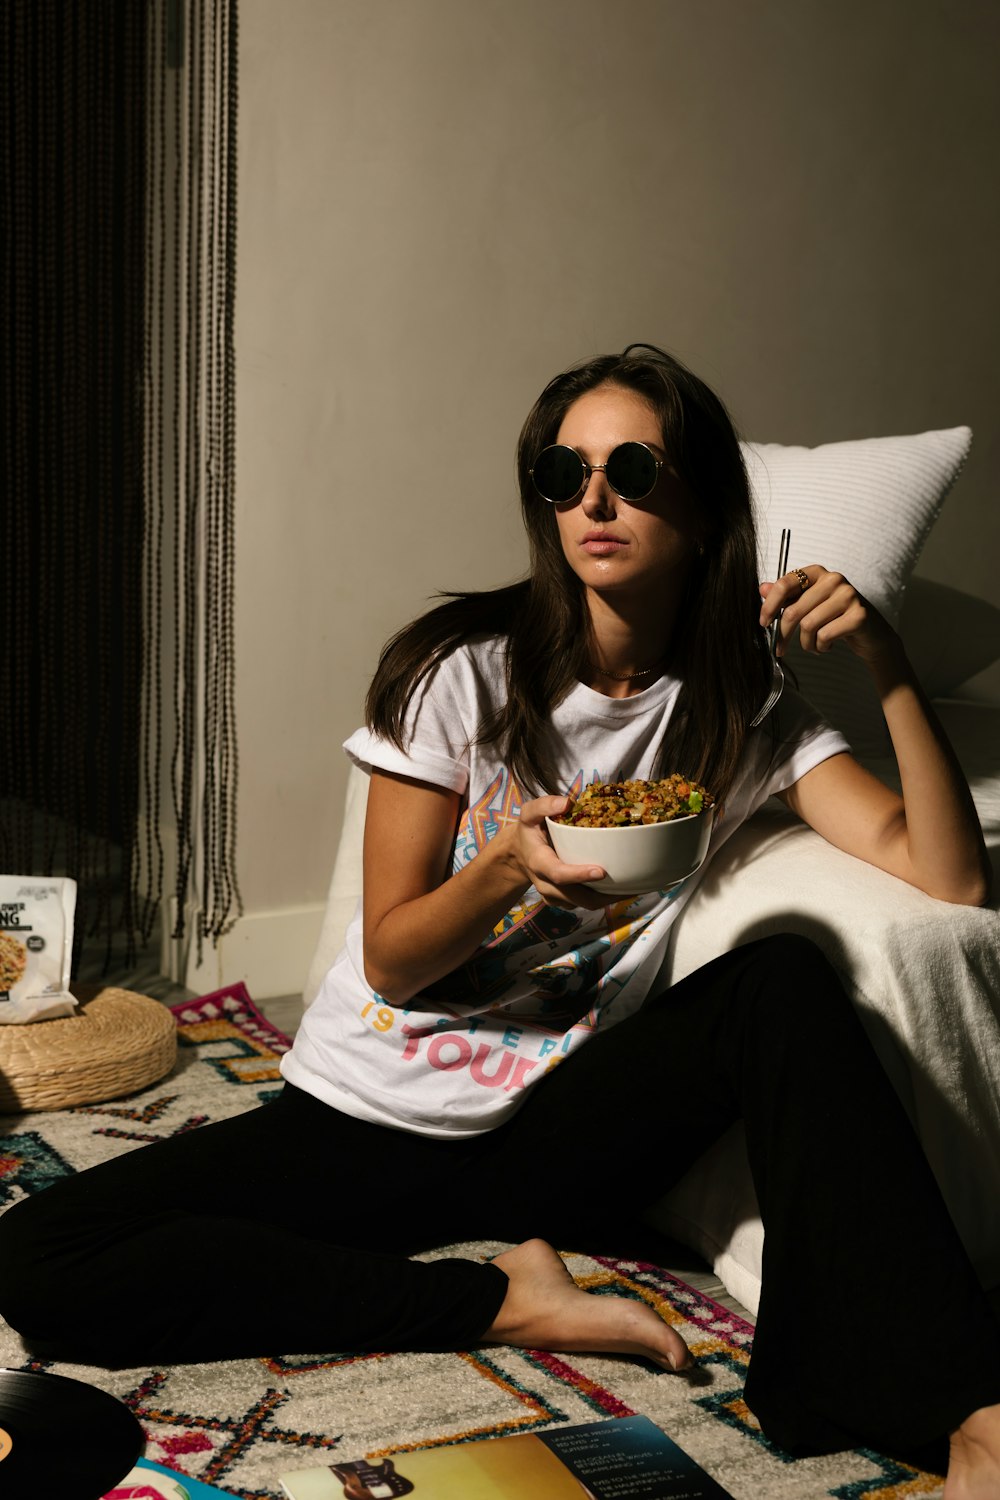 a woman sitting on a bed eating a bowl of cereal